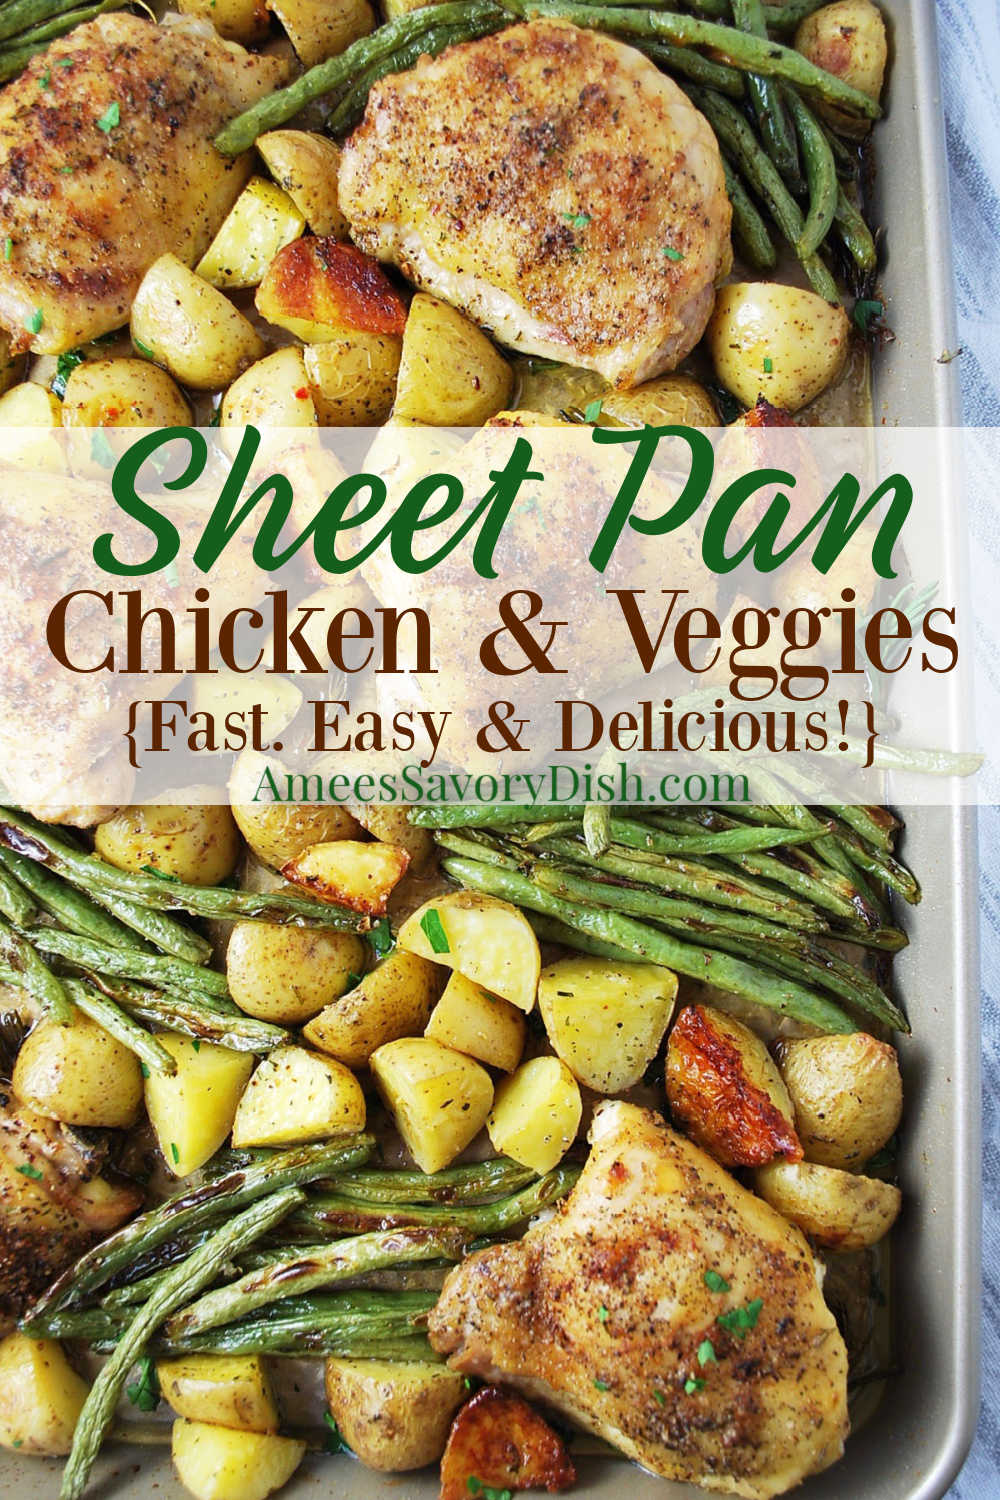 This Herb-Roasted Sheet Pan Chicken recipe made with chicken thighs, gold potatoes, and fresh green beans makes a delicious and easy weeknight meal.  This is a nutritious dinner that the whole family will devour! #sheetpanchicken #chickendinner #easychickenrecipe #chicken #onepanchicken via @Ameessavorydish